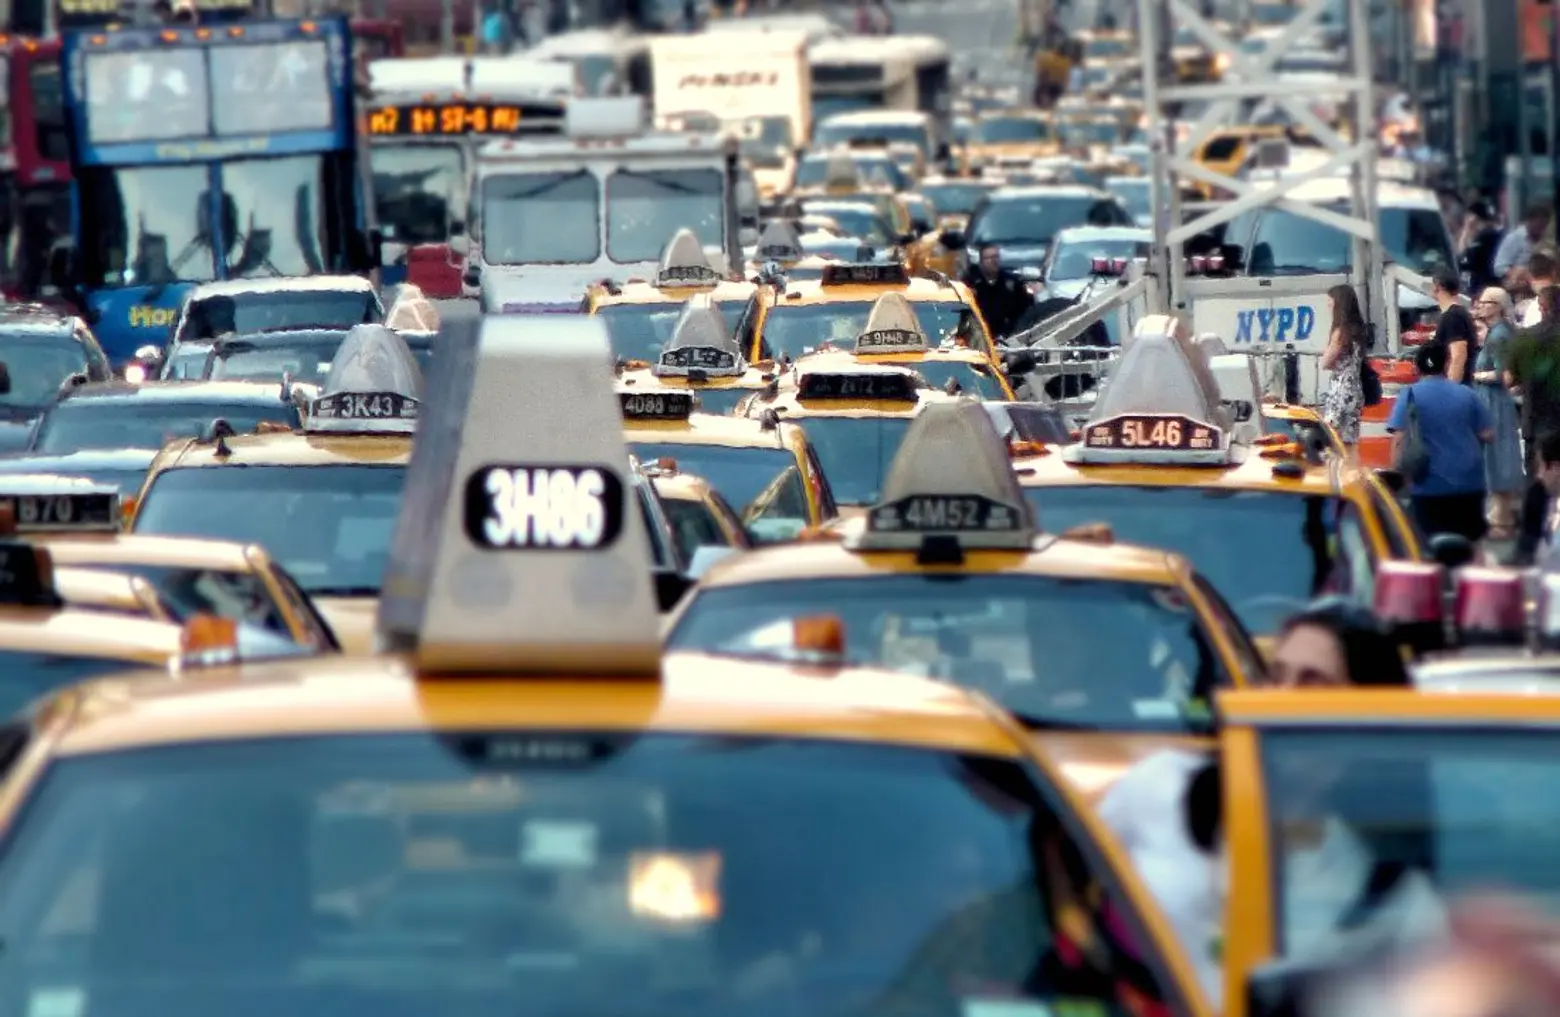 $20M Allocated to New Technology That Will Let NYC Vehicles ‘Talk’ to Each Other